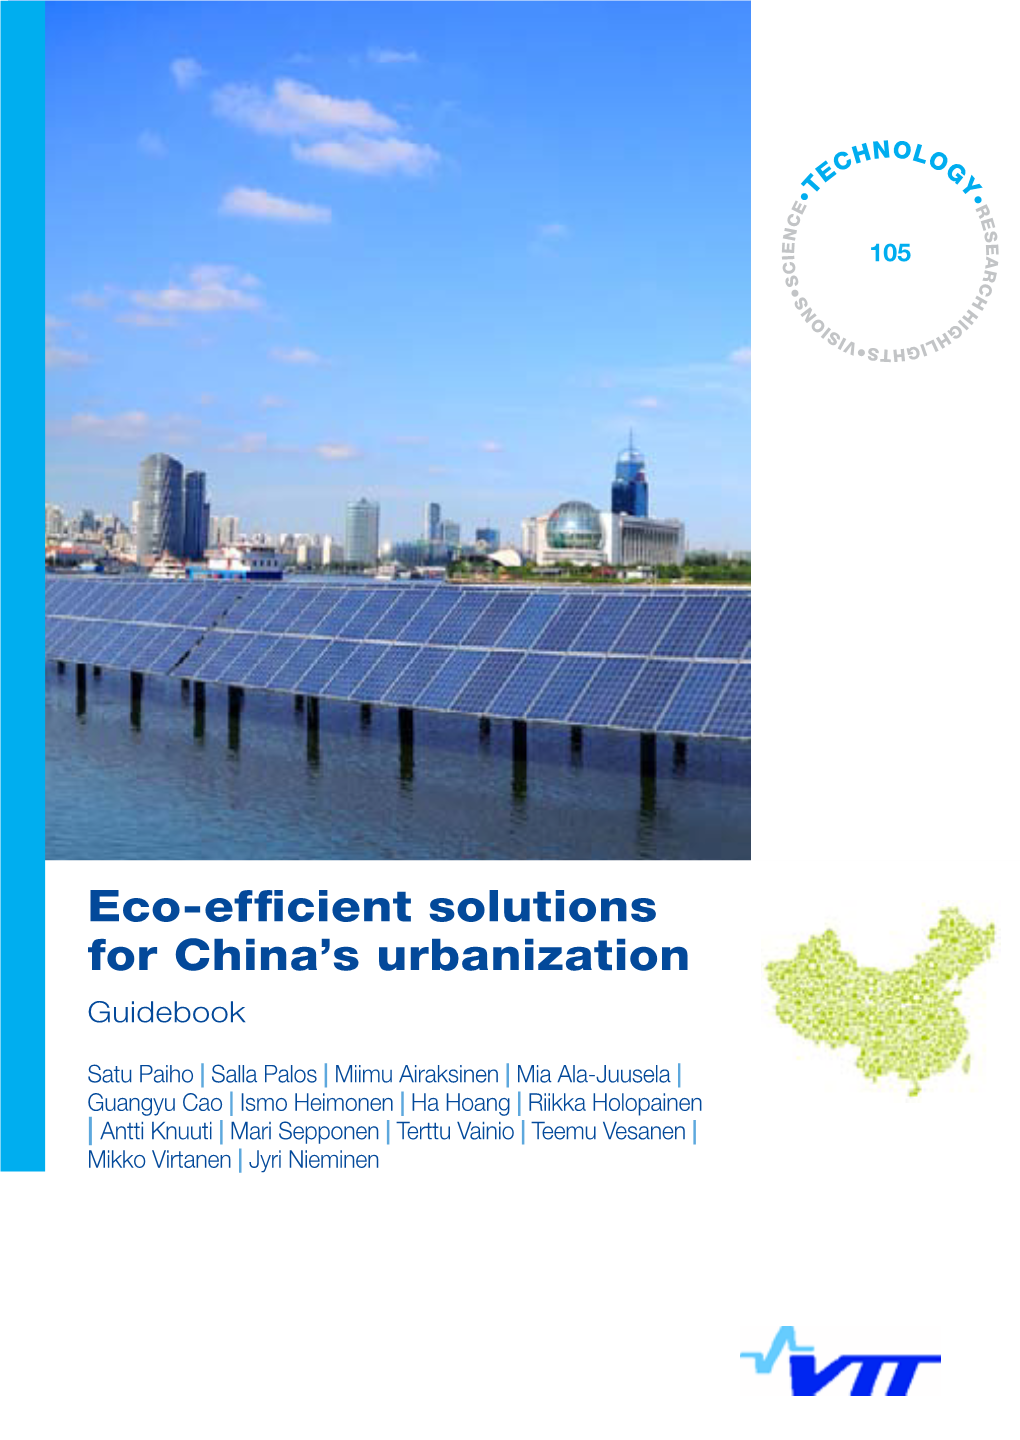 Eco-Efficient Solutions for China's Urbanization. Guidebook